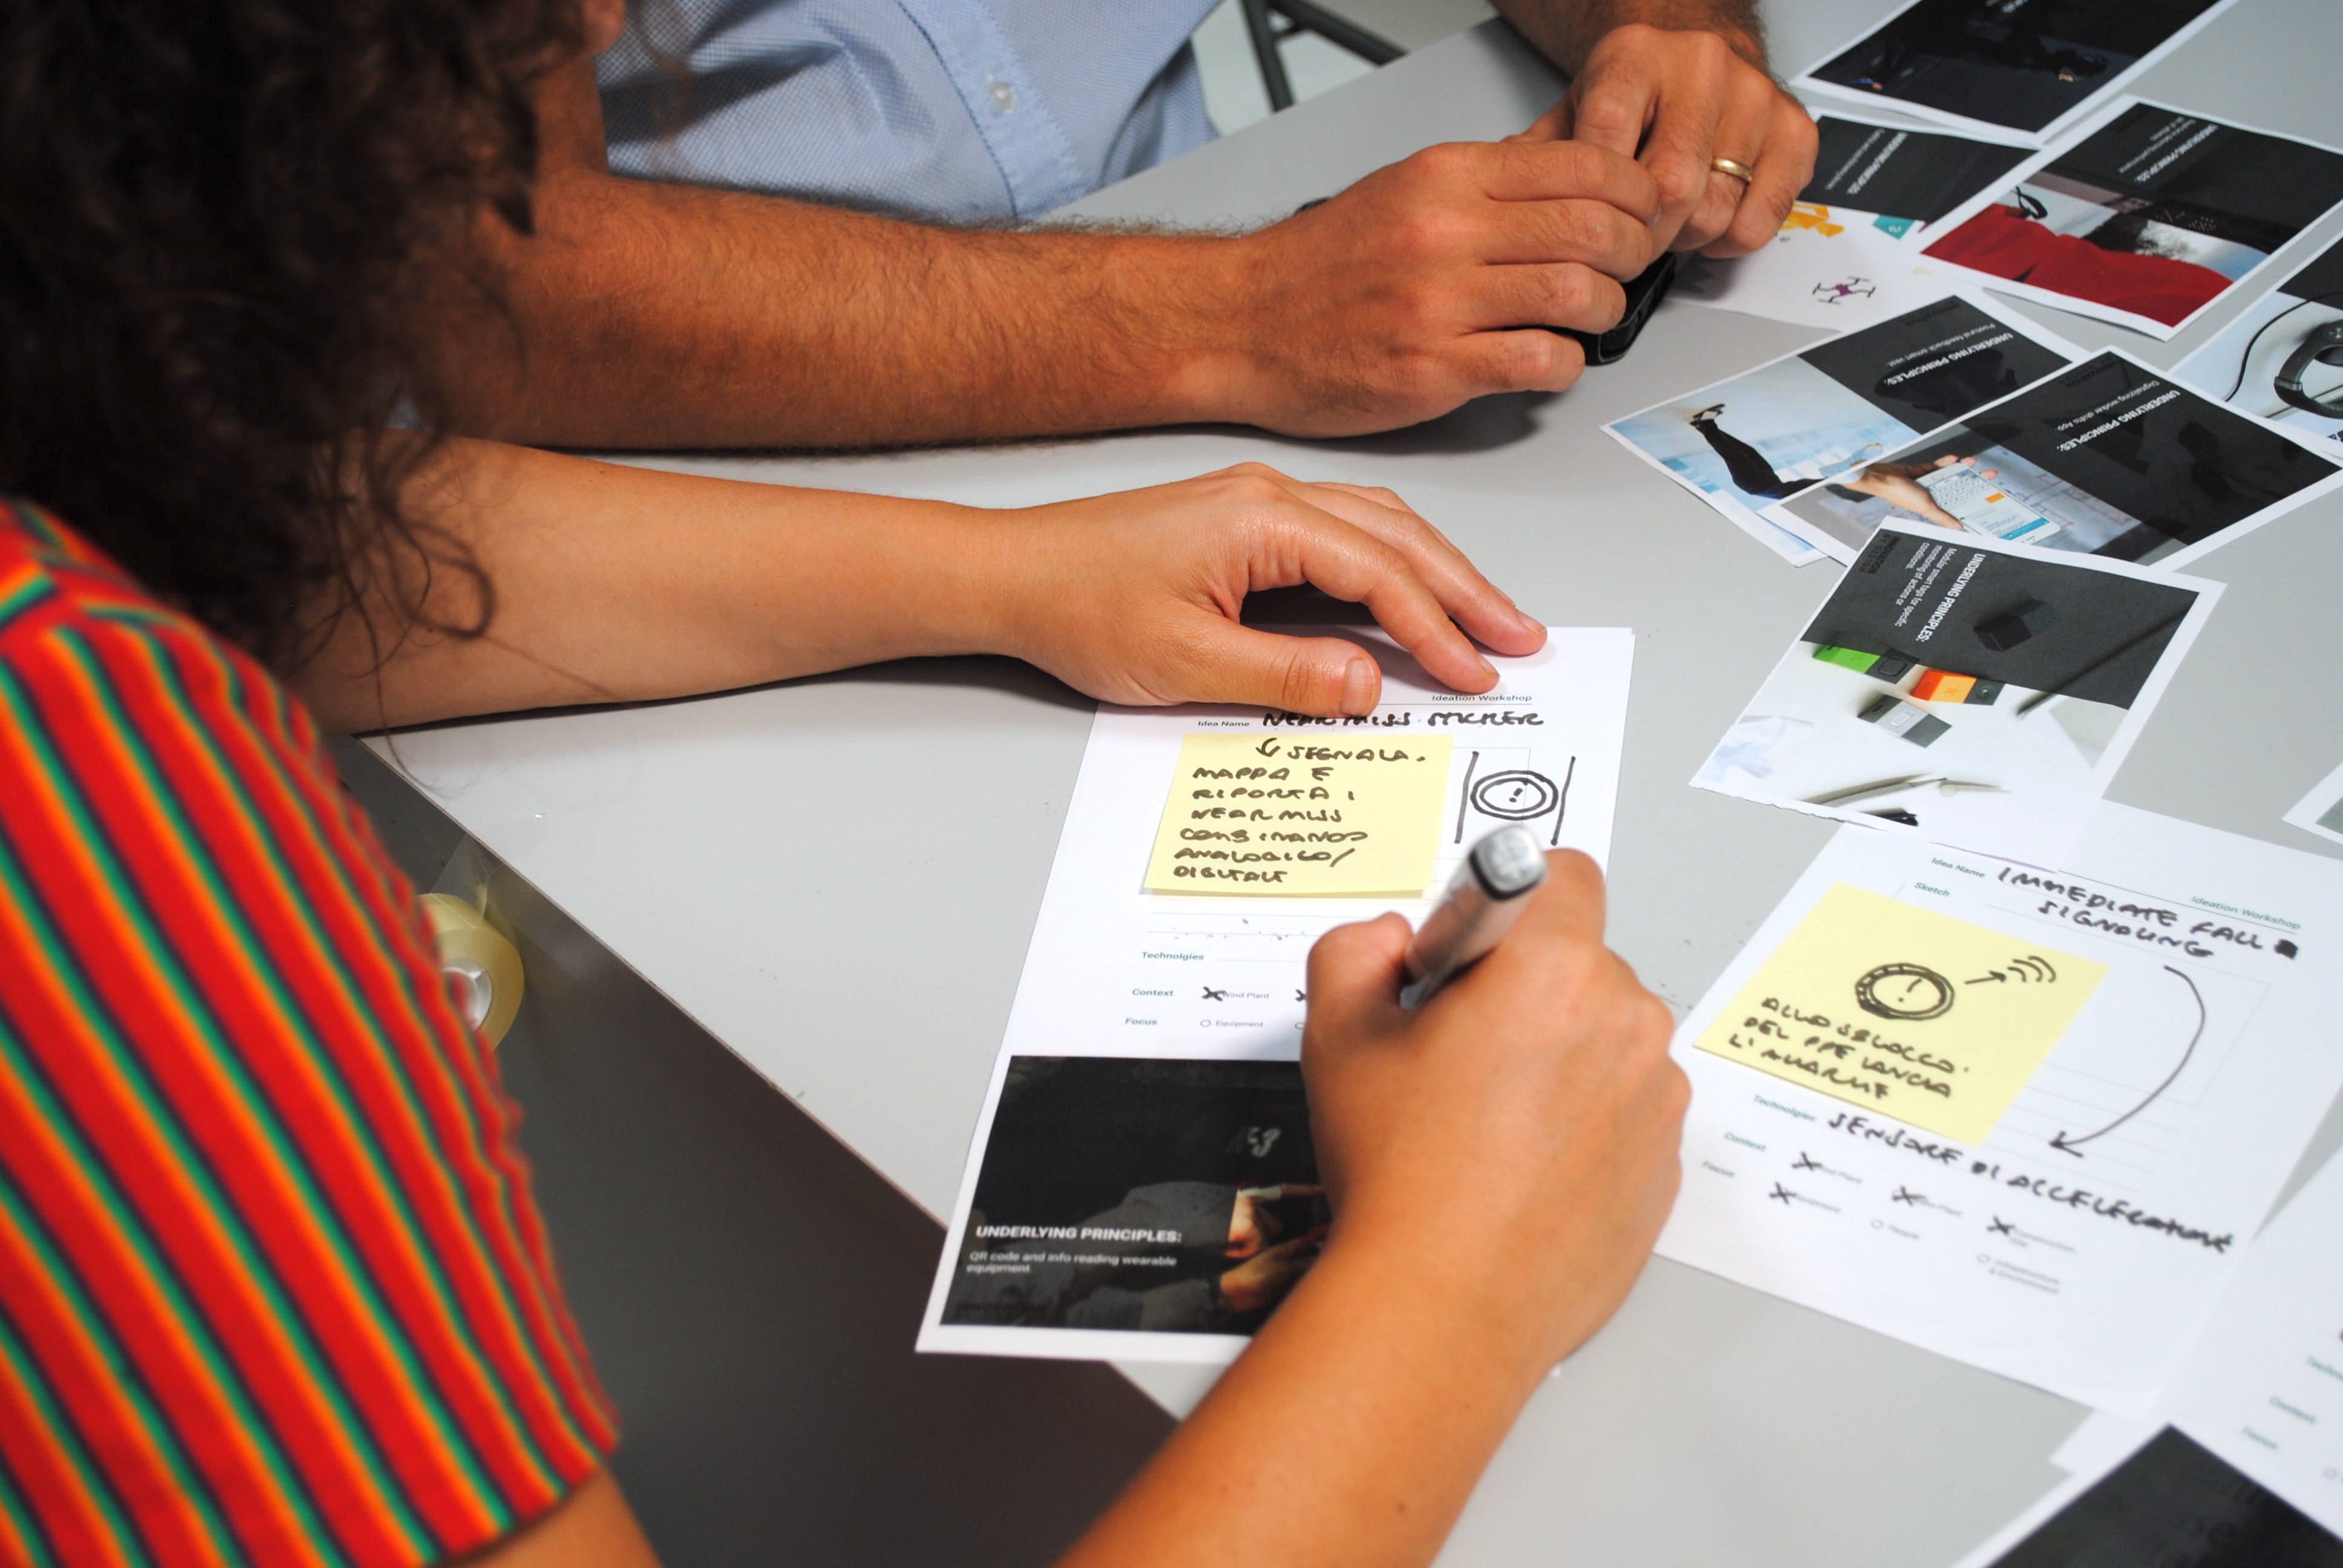 Ideation workshop: from opportunities to product-service concepts